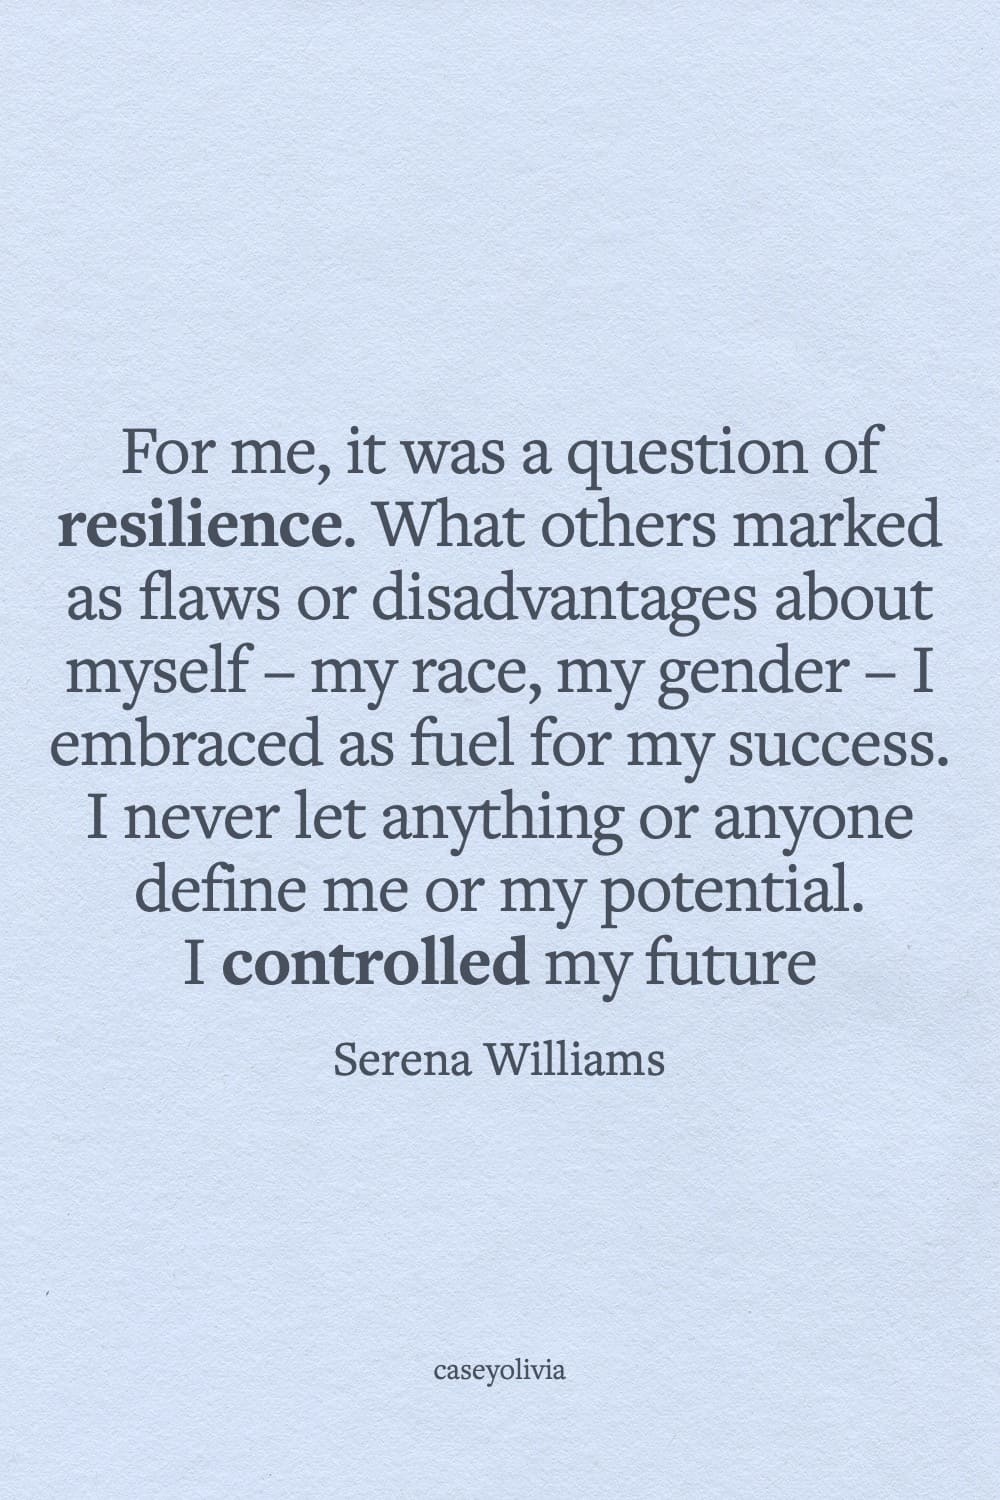 resilience quote about controlling your future